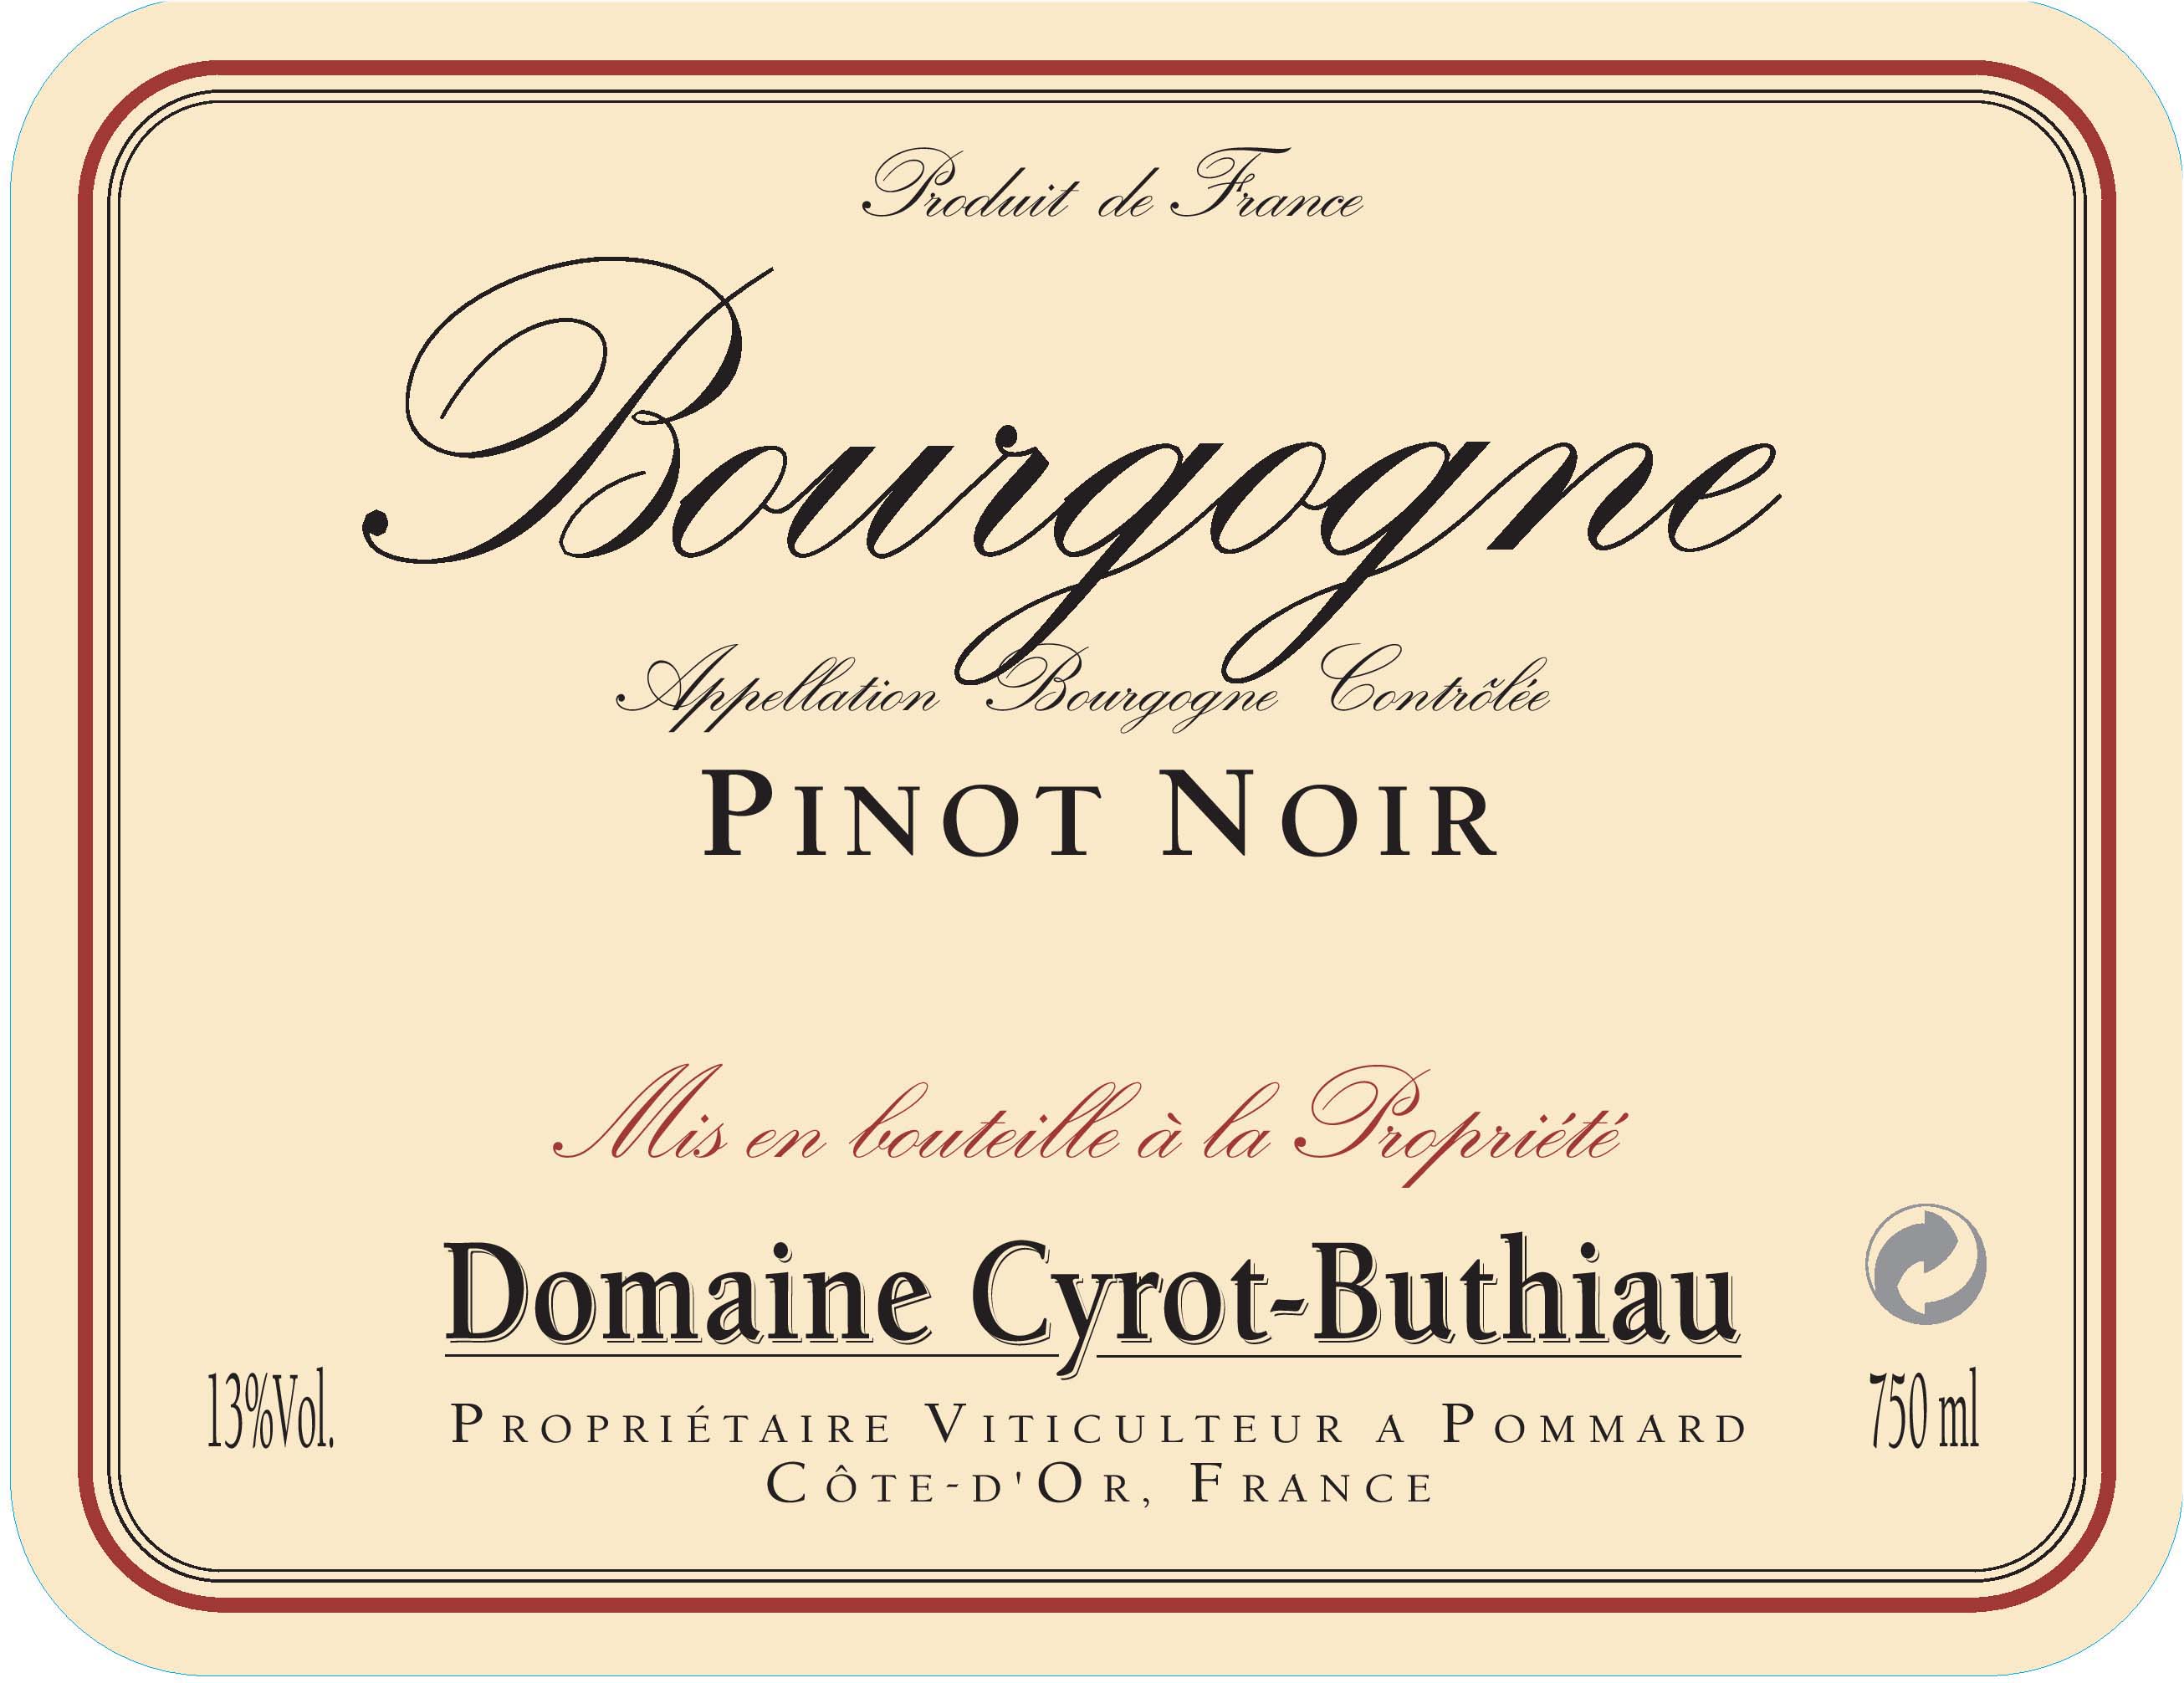 Domaine Cyrot-Buthiau - Pinot Noir label